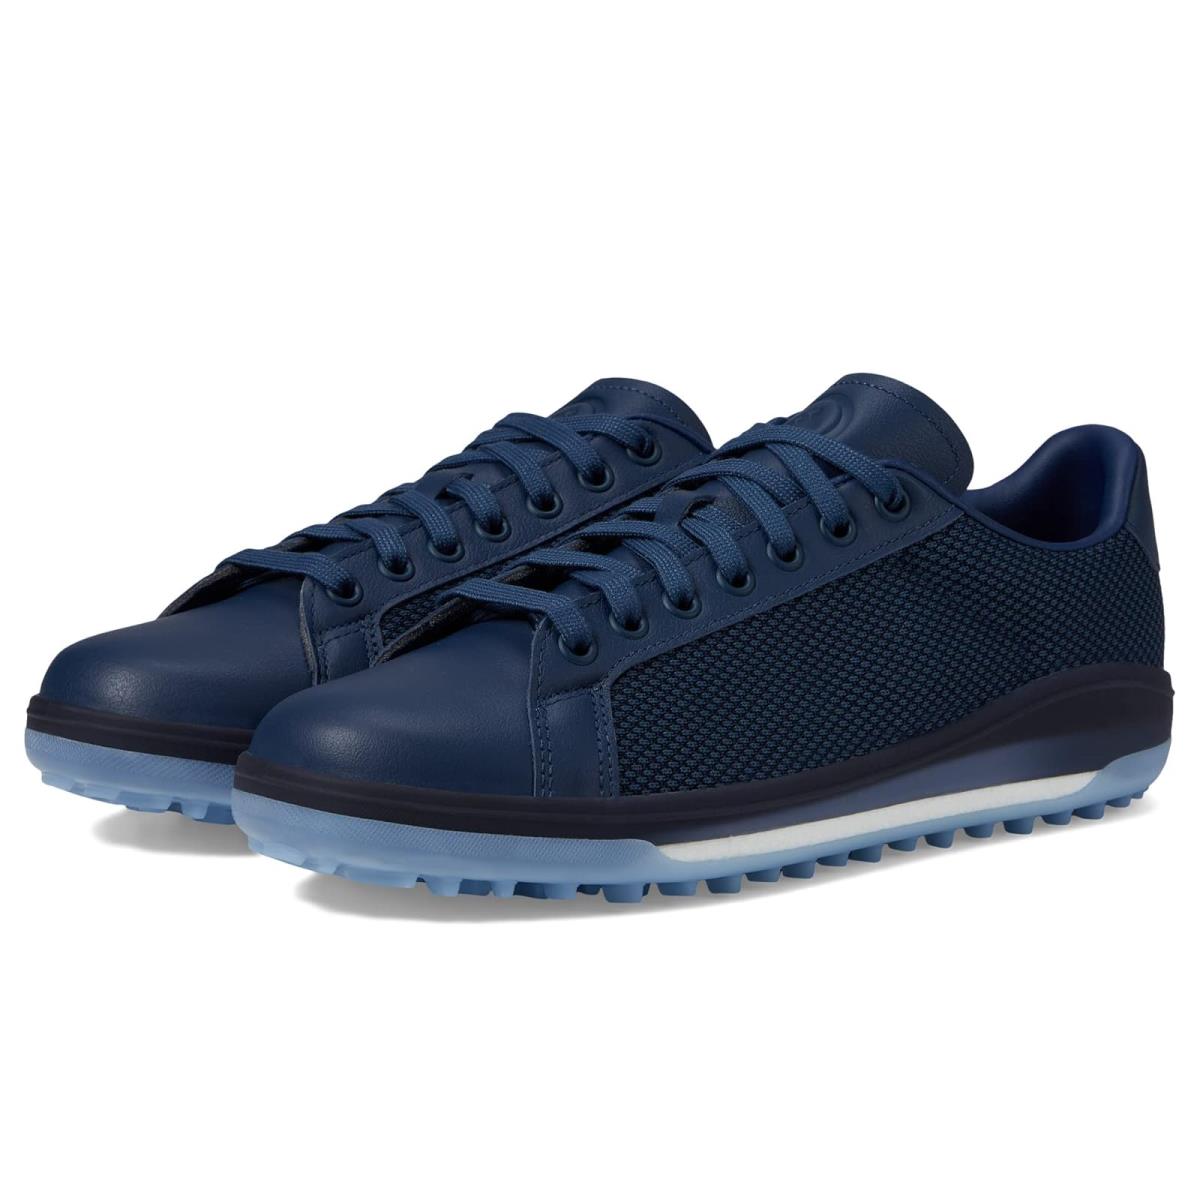 Man`s Sneakers Athletic Shoes Adidas Golf Go-to Spkl 1 Golf Shoes Crew Navy/Collegiate Navy/Blue Fusion